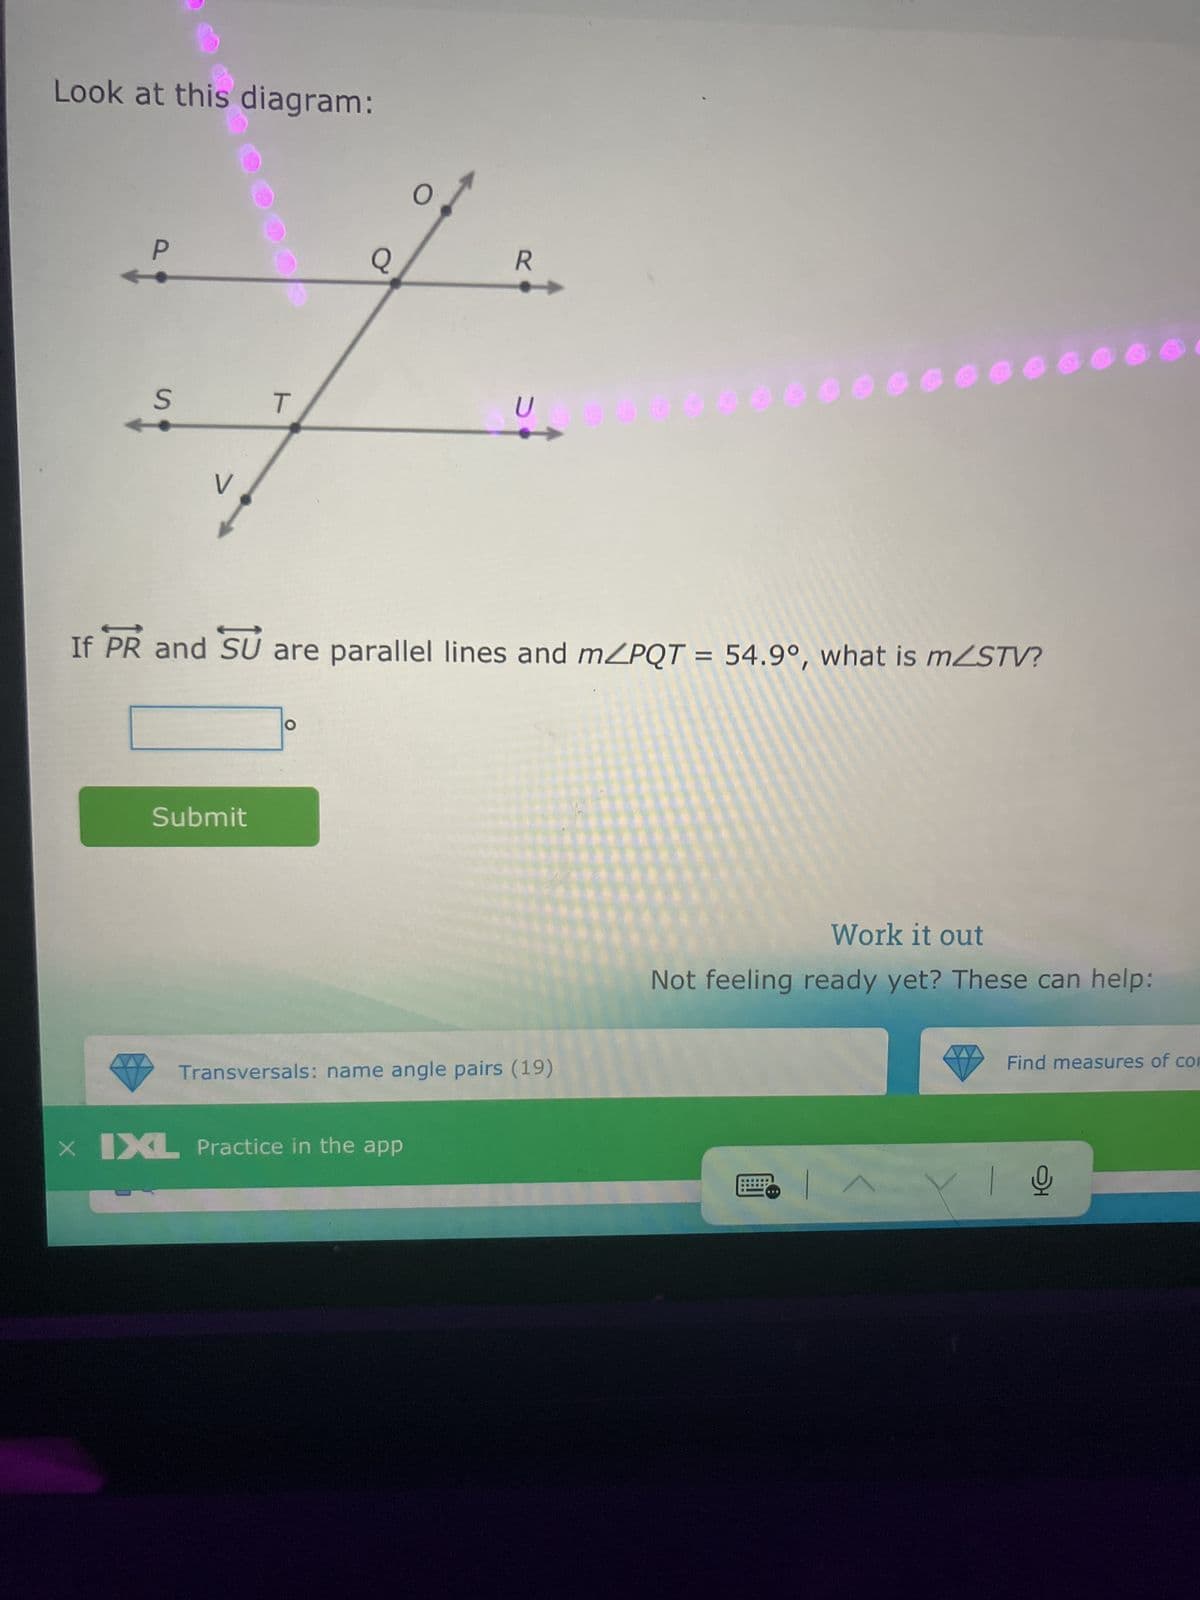 Look at this diagram:
O
P
Q
S
V
R
T
U
000000
If PR and SU are parallel lines and m/PQT = 54.9°, what is mZSTV?
Submit
Transversals: name angle pairs (19)
× IXL Practice in the app
Work it out
Not feeling ready yet? These can help:
Find measures of com
어